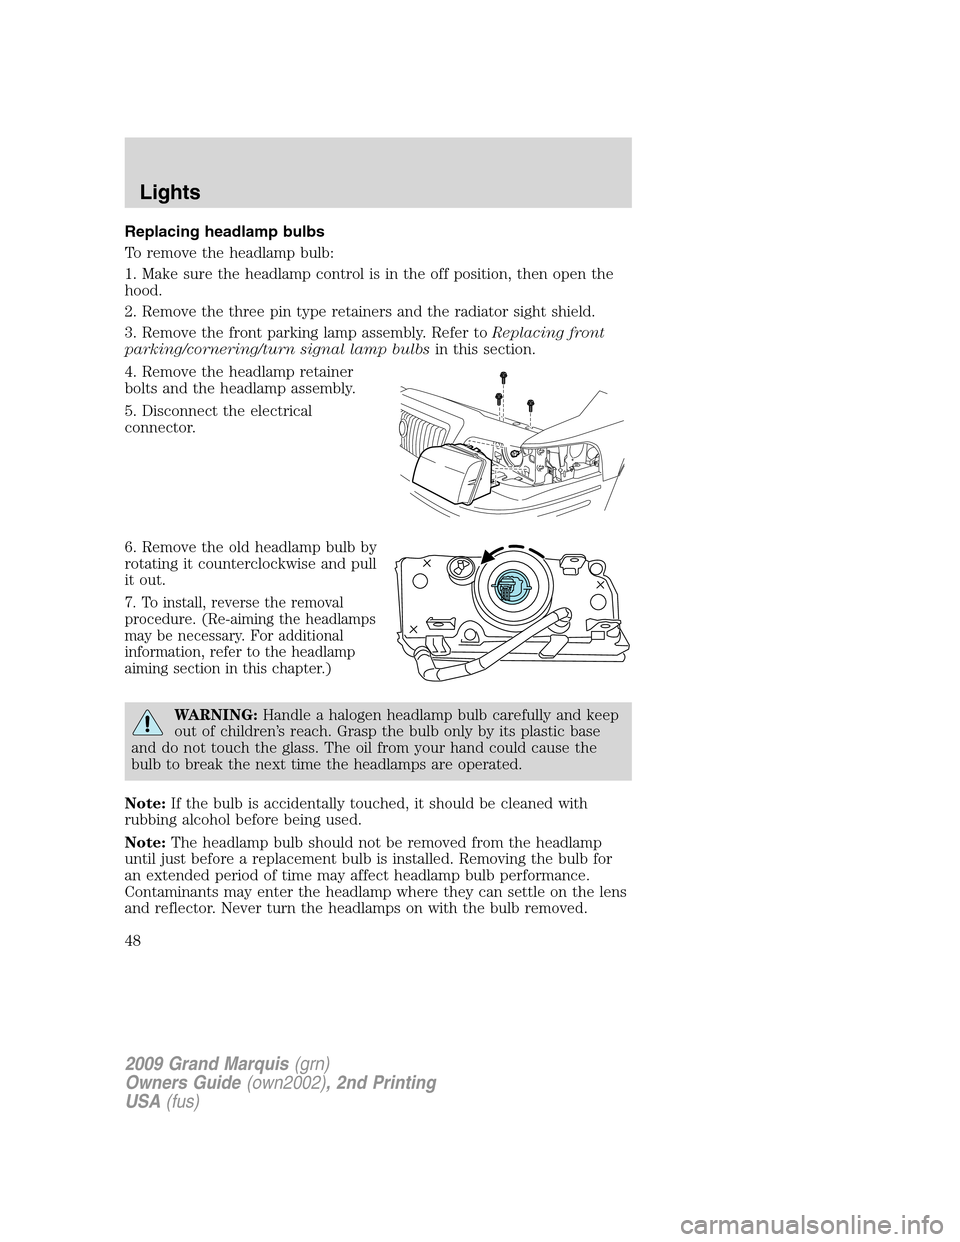 Mercury Grand Marquis 2009  Owners Manuals Replacing headlamp bulbs
To remove the headlamp bulb:
1. Make sure the headlamp control is in the off position, then open the
hood.
2. Remove the three pin type retainers and the radiator sight shield